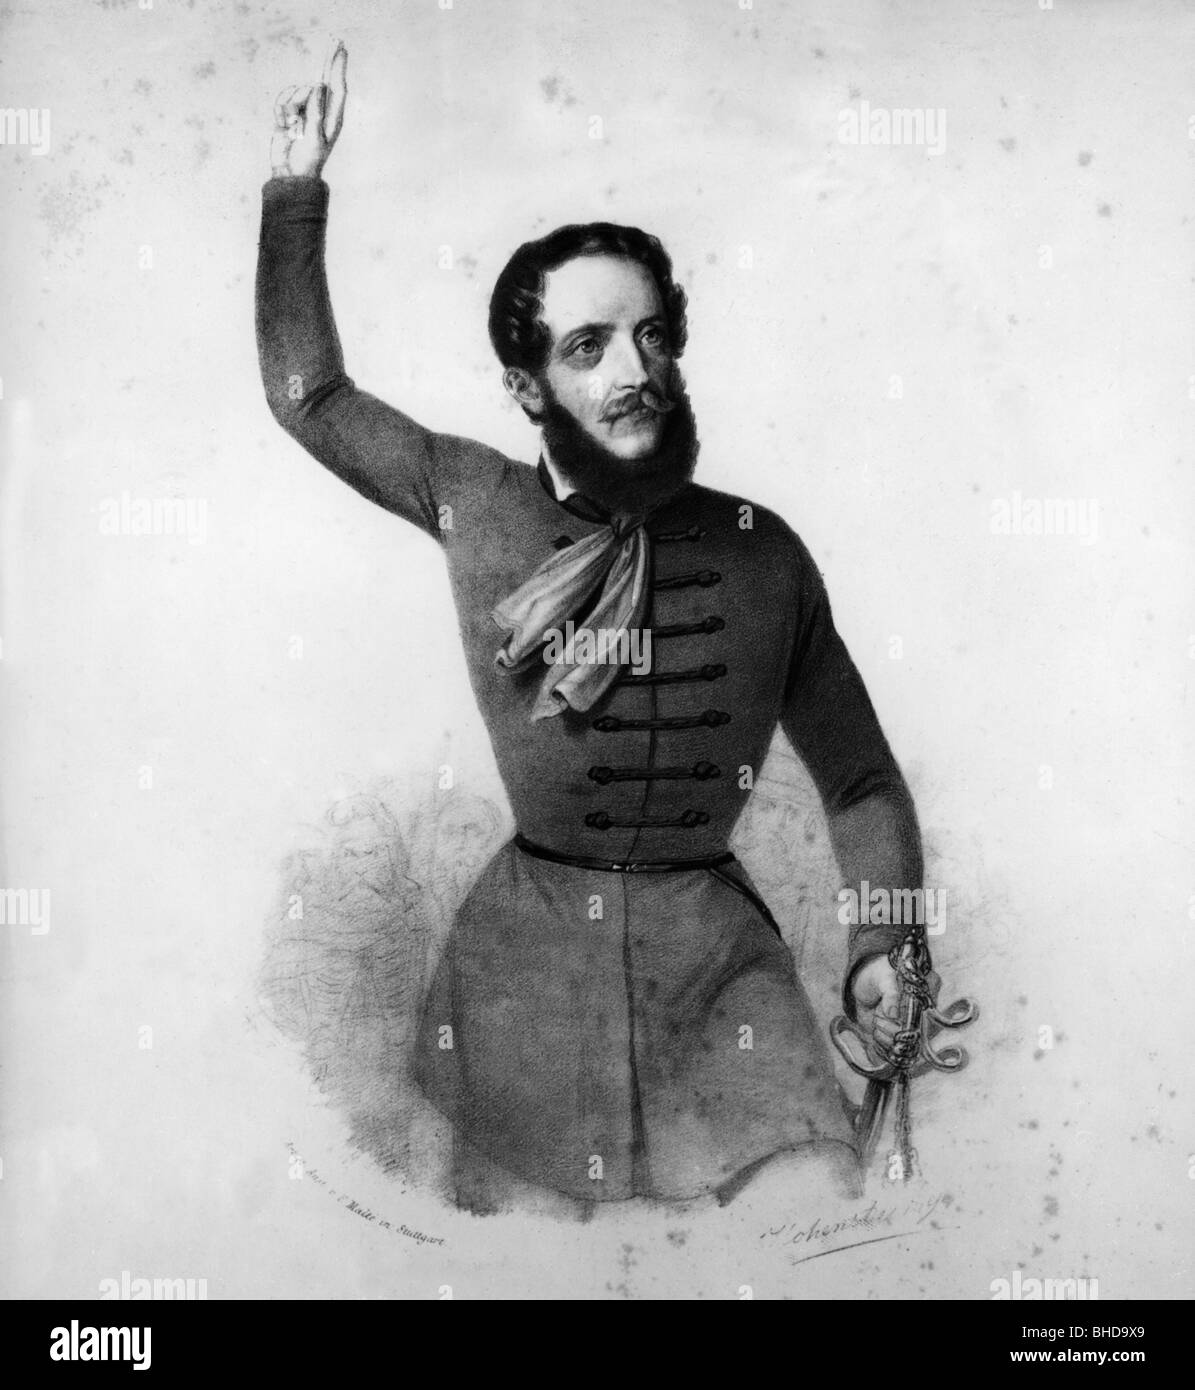 Kossuth, Lajos, 16.9.1802 - 20.3.1894, Hungarian politician, Regent-President of Hungary in 1849, half length, contemporary lithograph, 19th century, Stock Photo